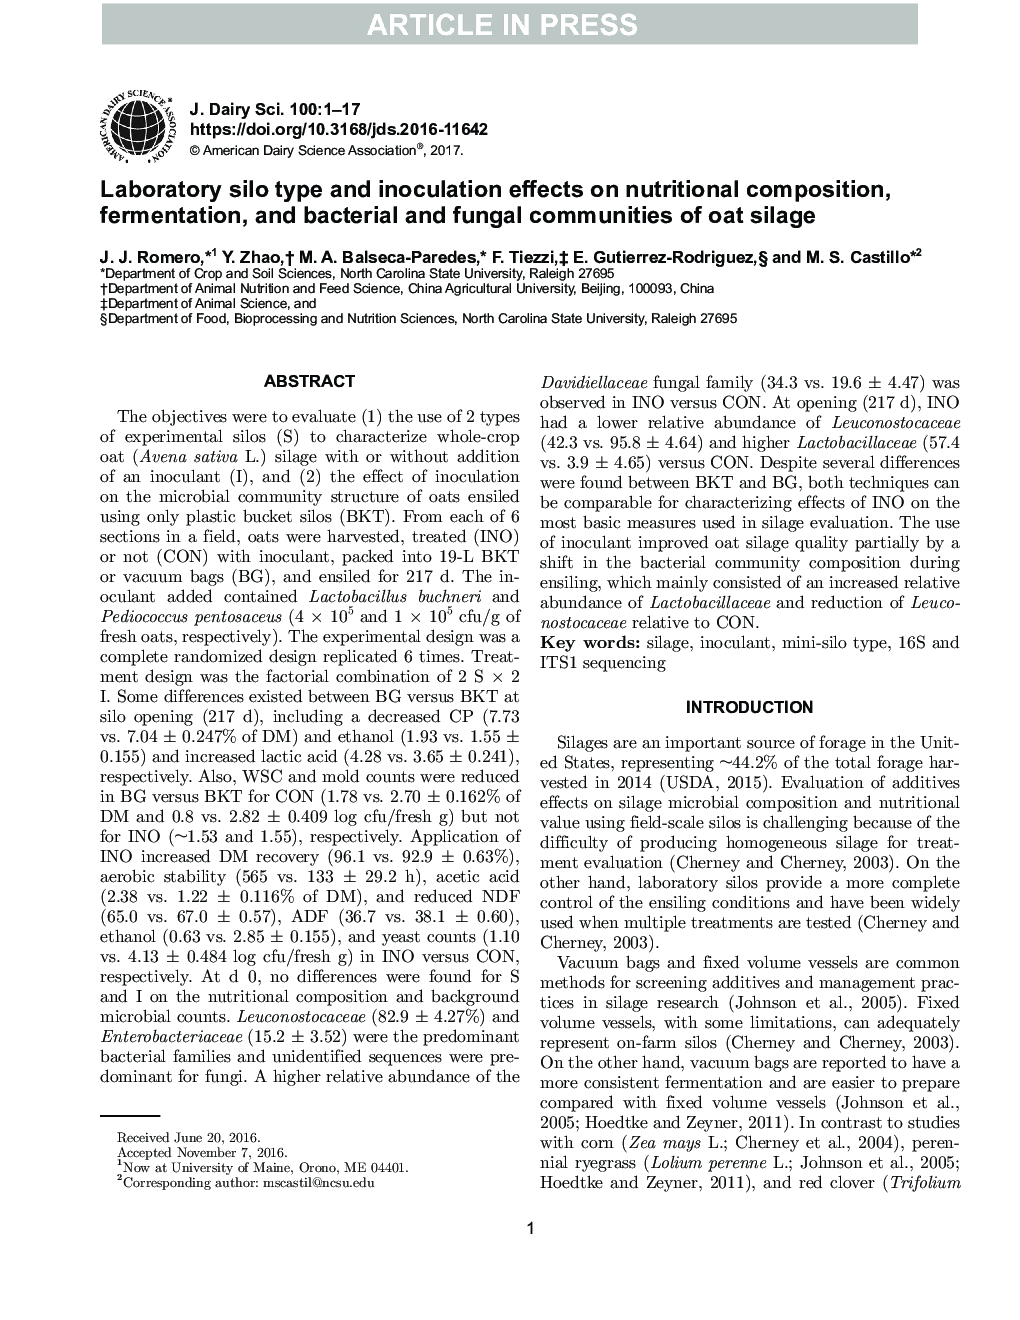 Laboratory silo type and inoculation effects on nutritional composition, fermentation, and bacterial and fungal communities of oat silage